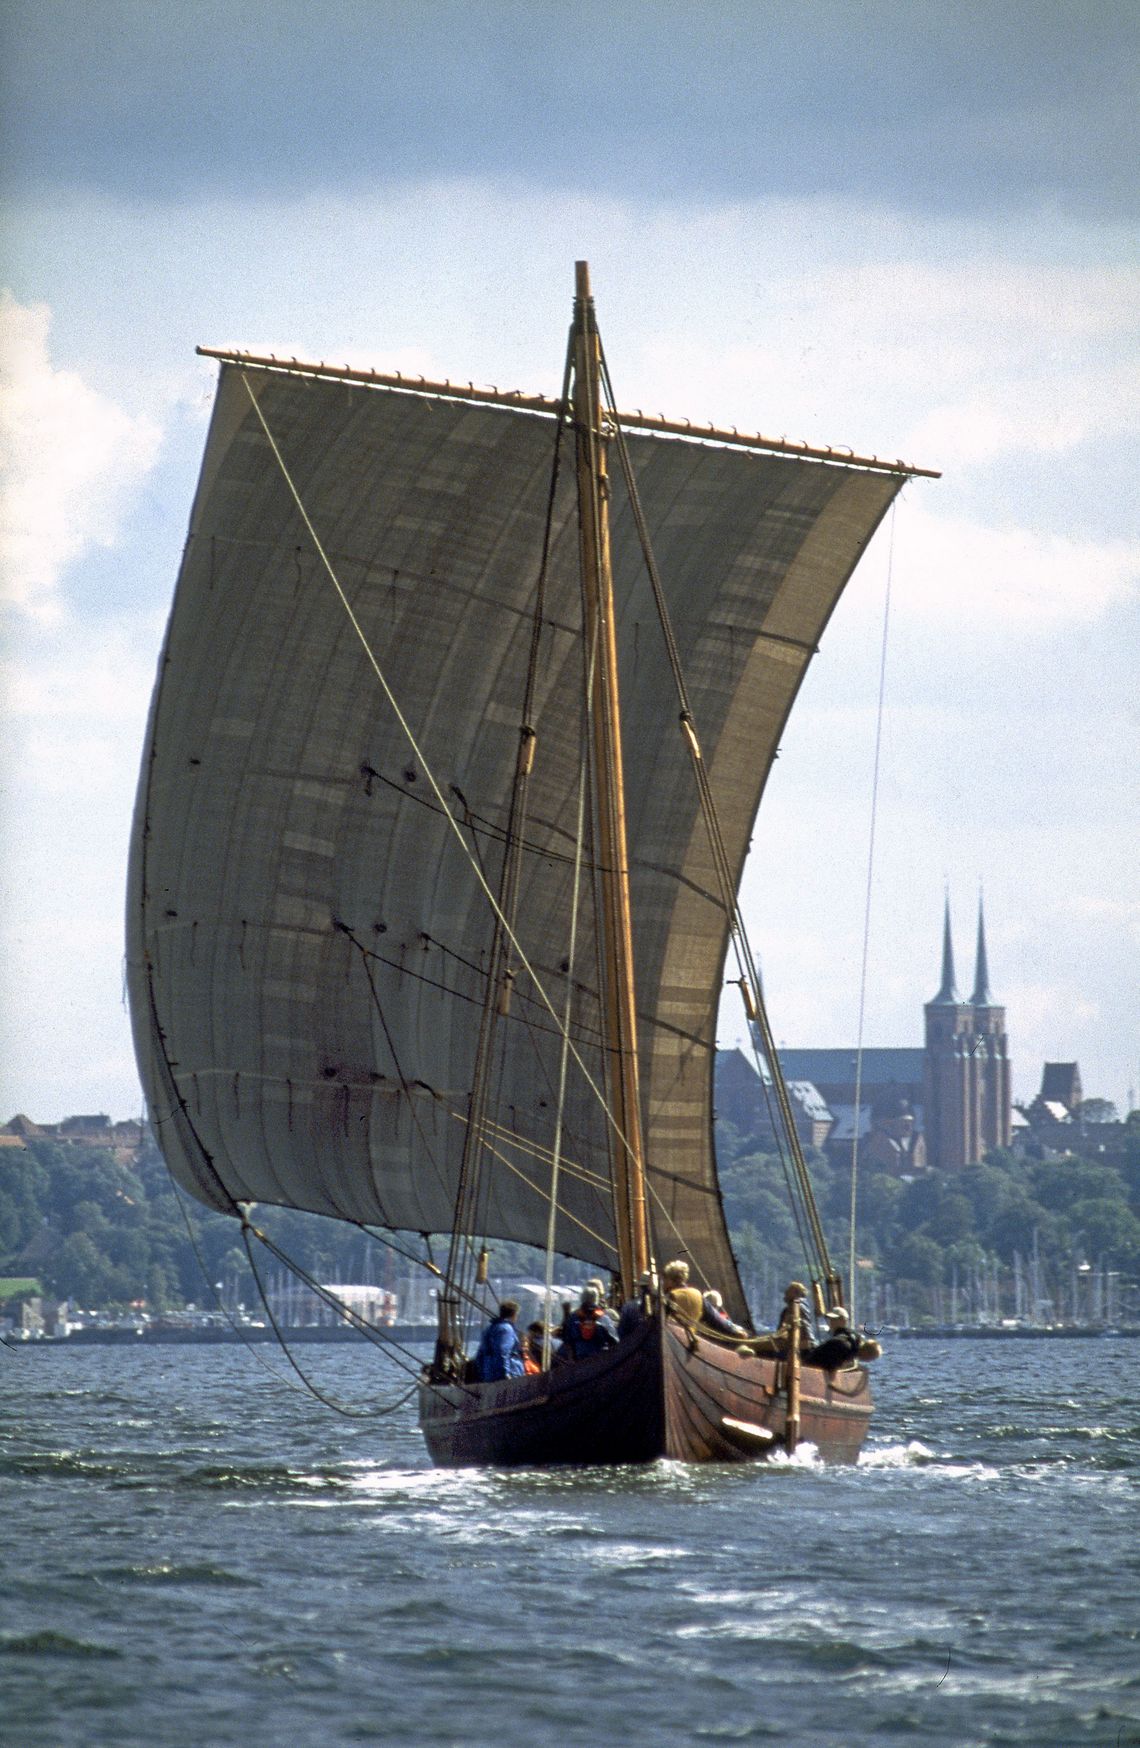 The Viking ship Ottar, a sailing reconstruction of Skuldelev 1, which can be seen at the Viking Ship Museum in Roskilde